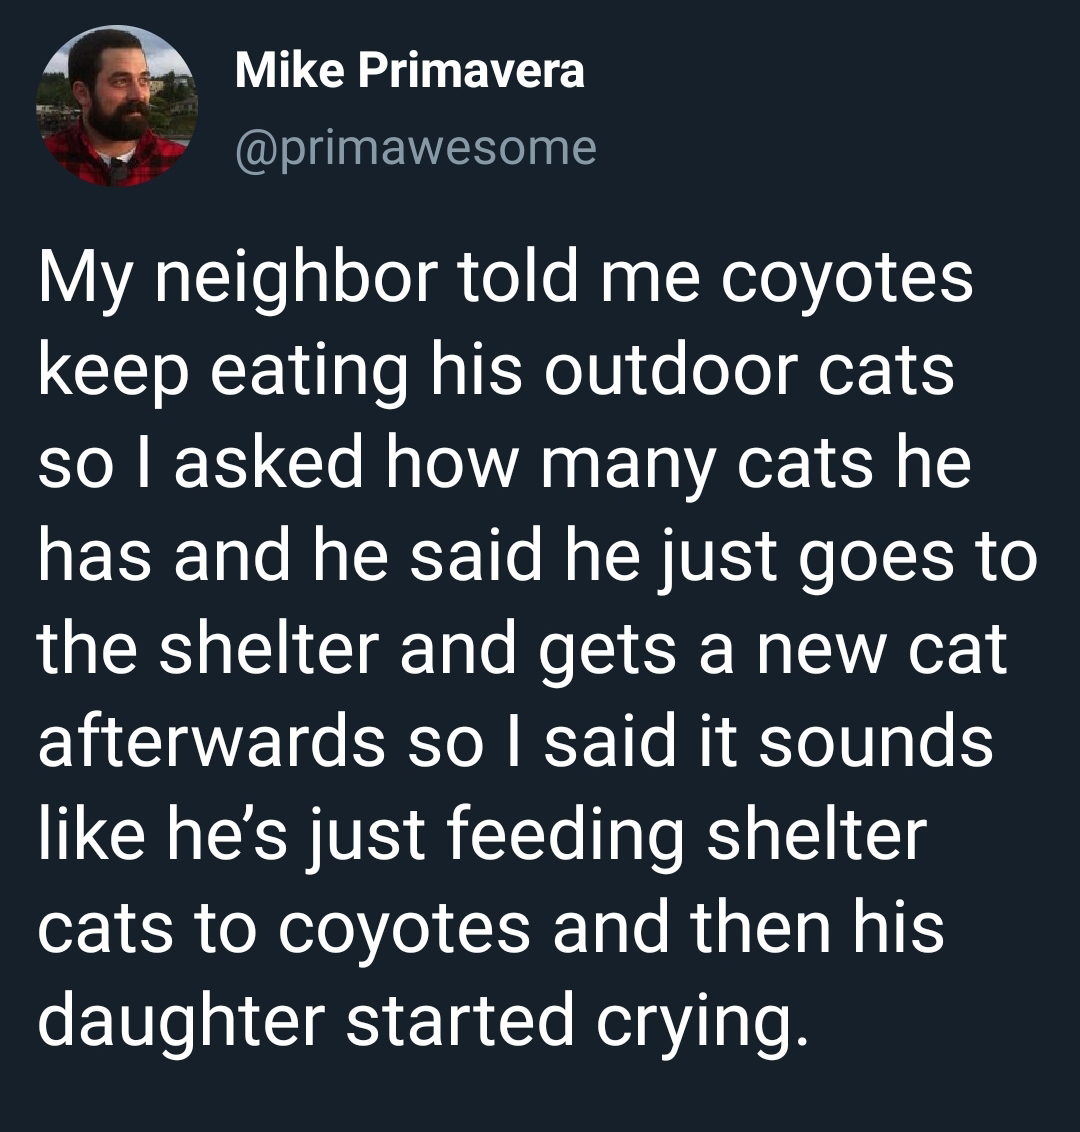 material - Mike Primavera My neighbor told me coyotes keep eating his outdoor cats so I asked how many cats he has and he said he just goes to the shelter and gets a new cat afterwards so I said it sounds he's just feeding shelter cats to coyotes and then